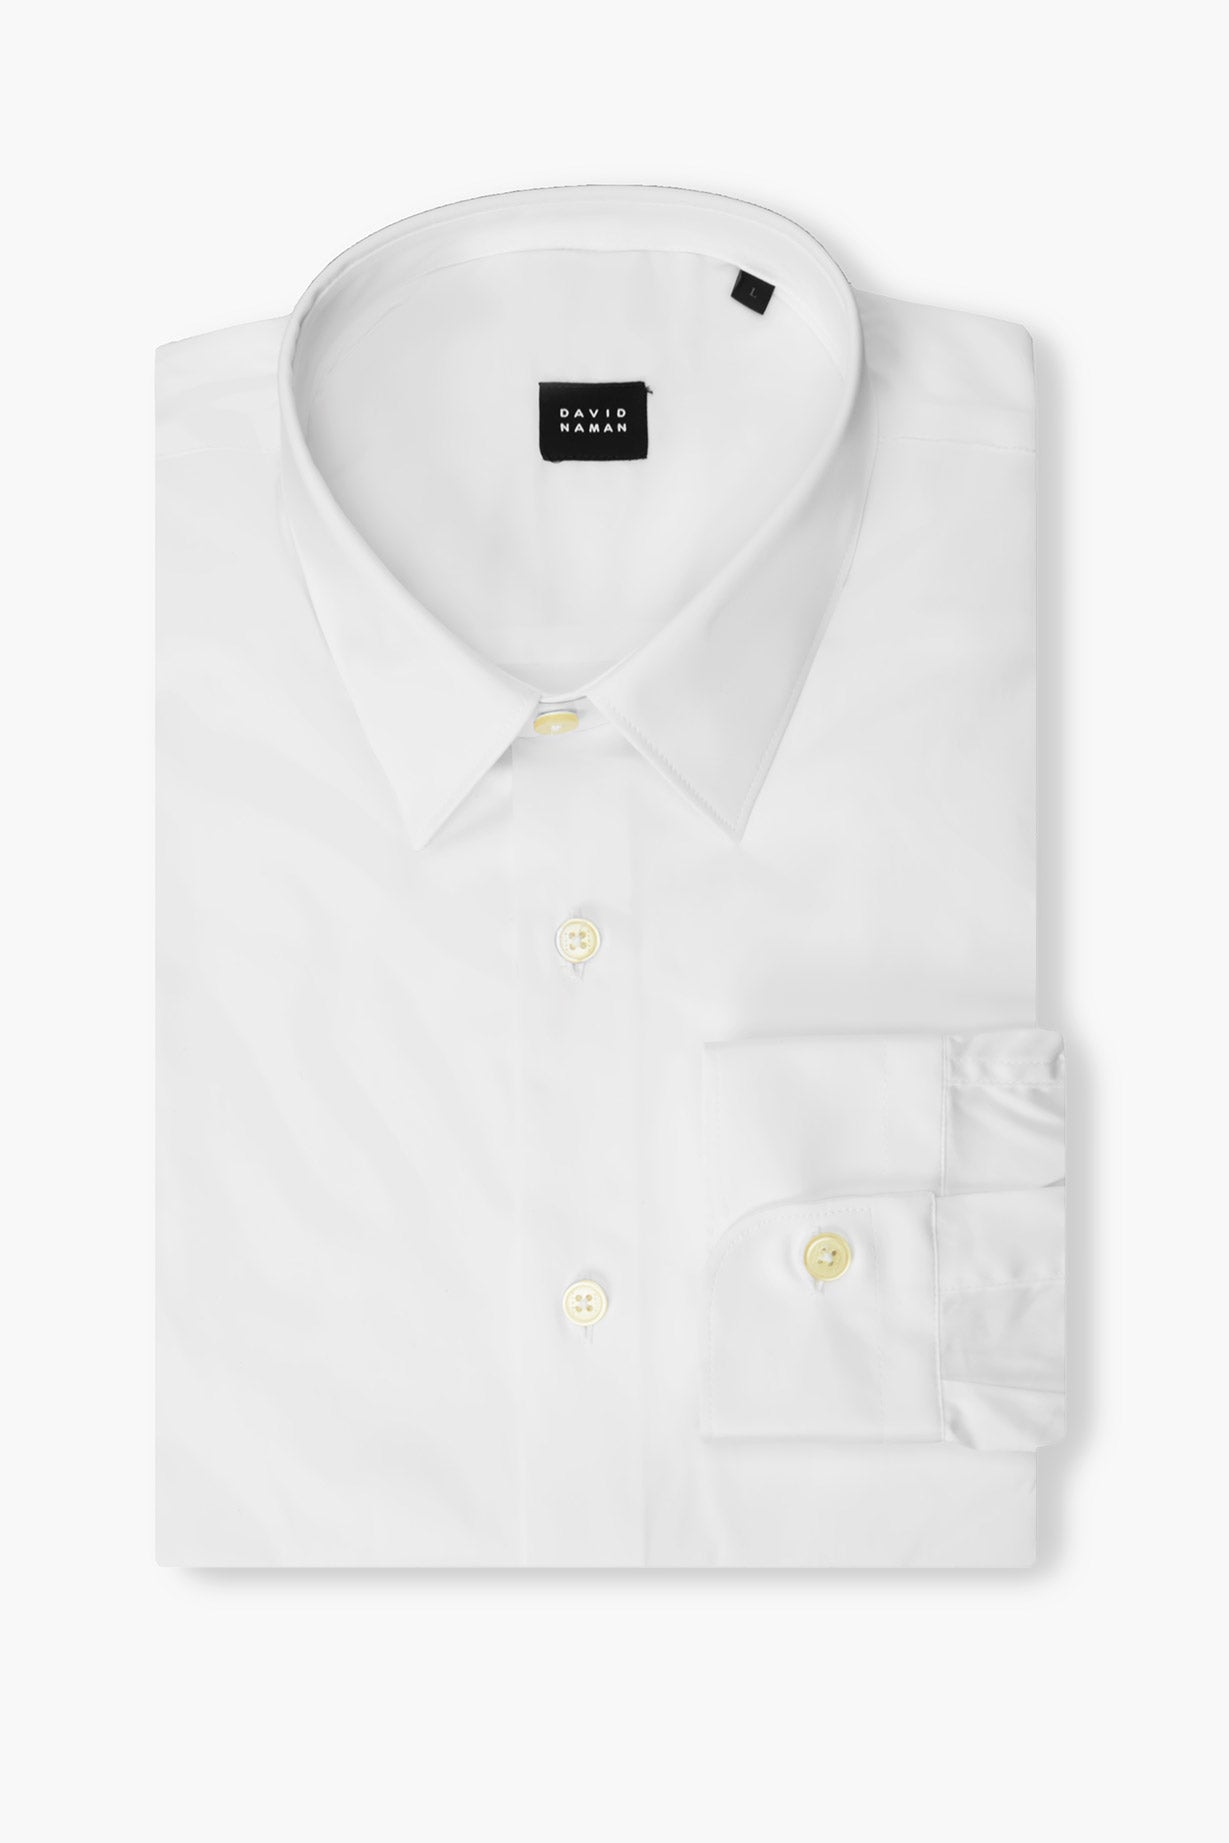 SHIRT IN TECHNICAL FABRIC - WHITE